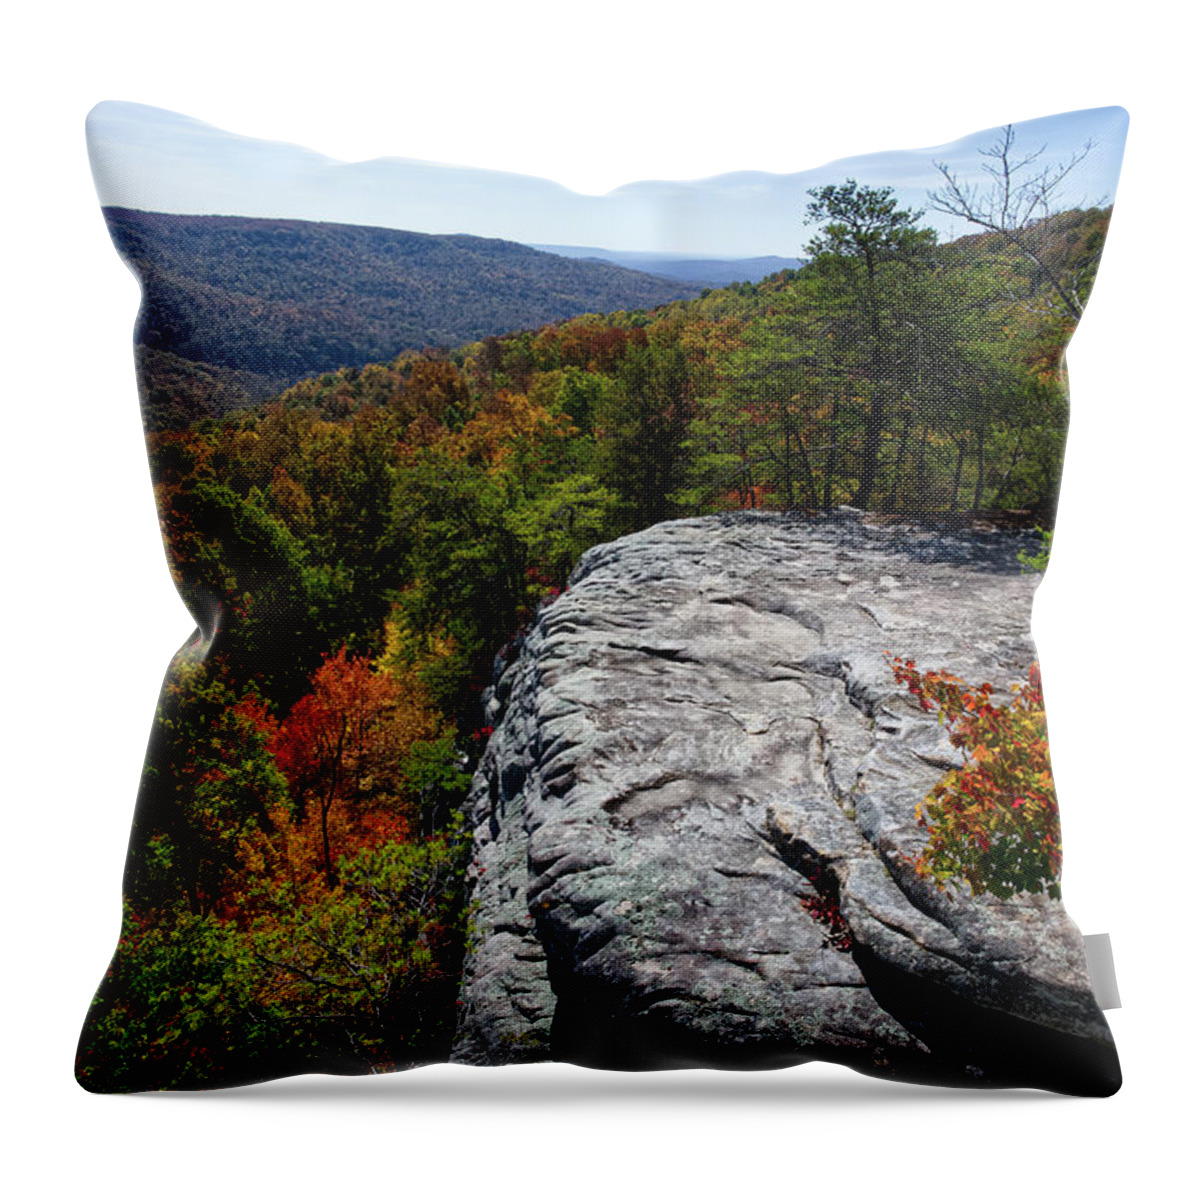 View Throw Pillow featuring the photograph Bee Rock Overlook 12 by Phil Perkins